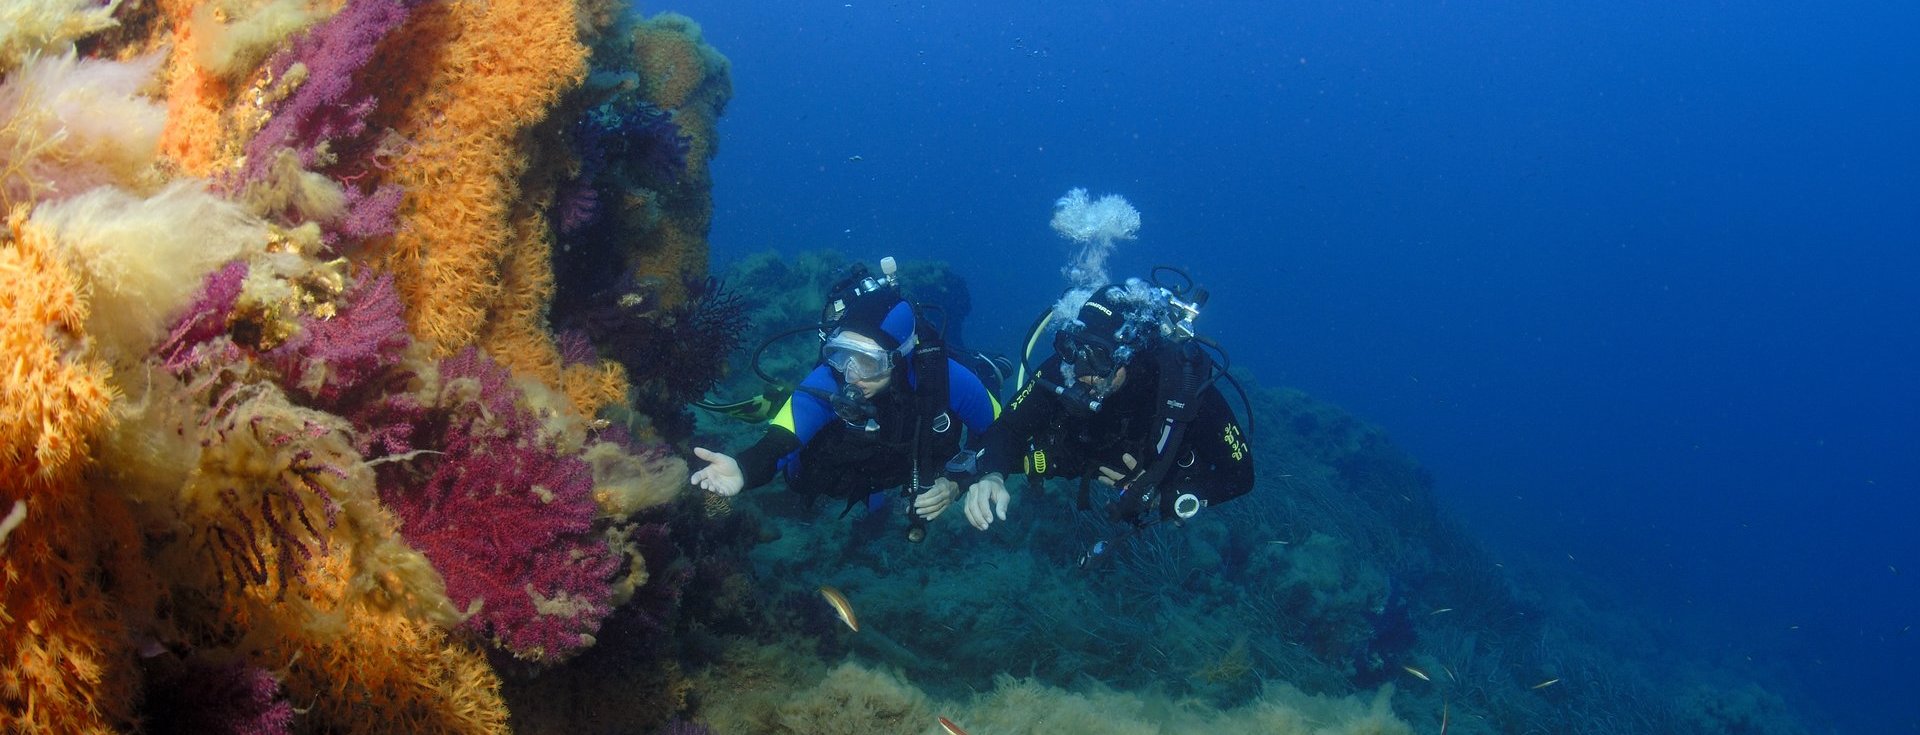 Shallow reef dive sites